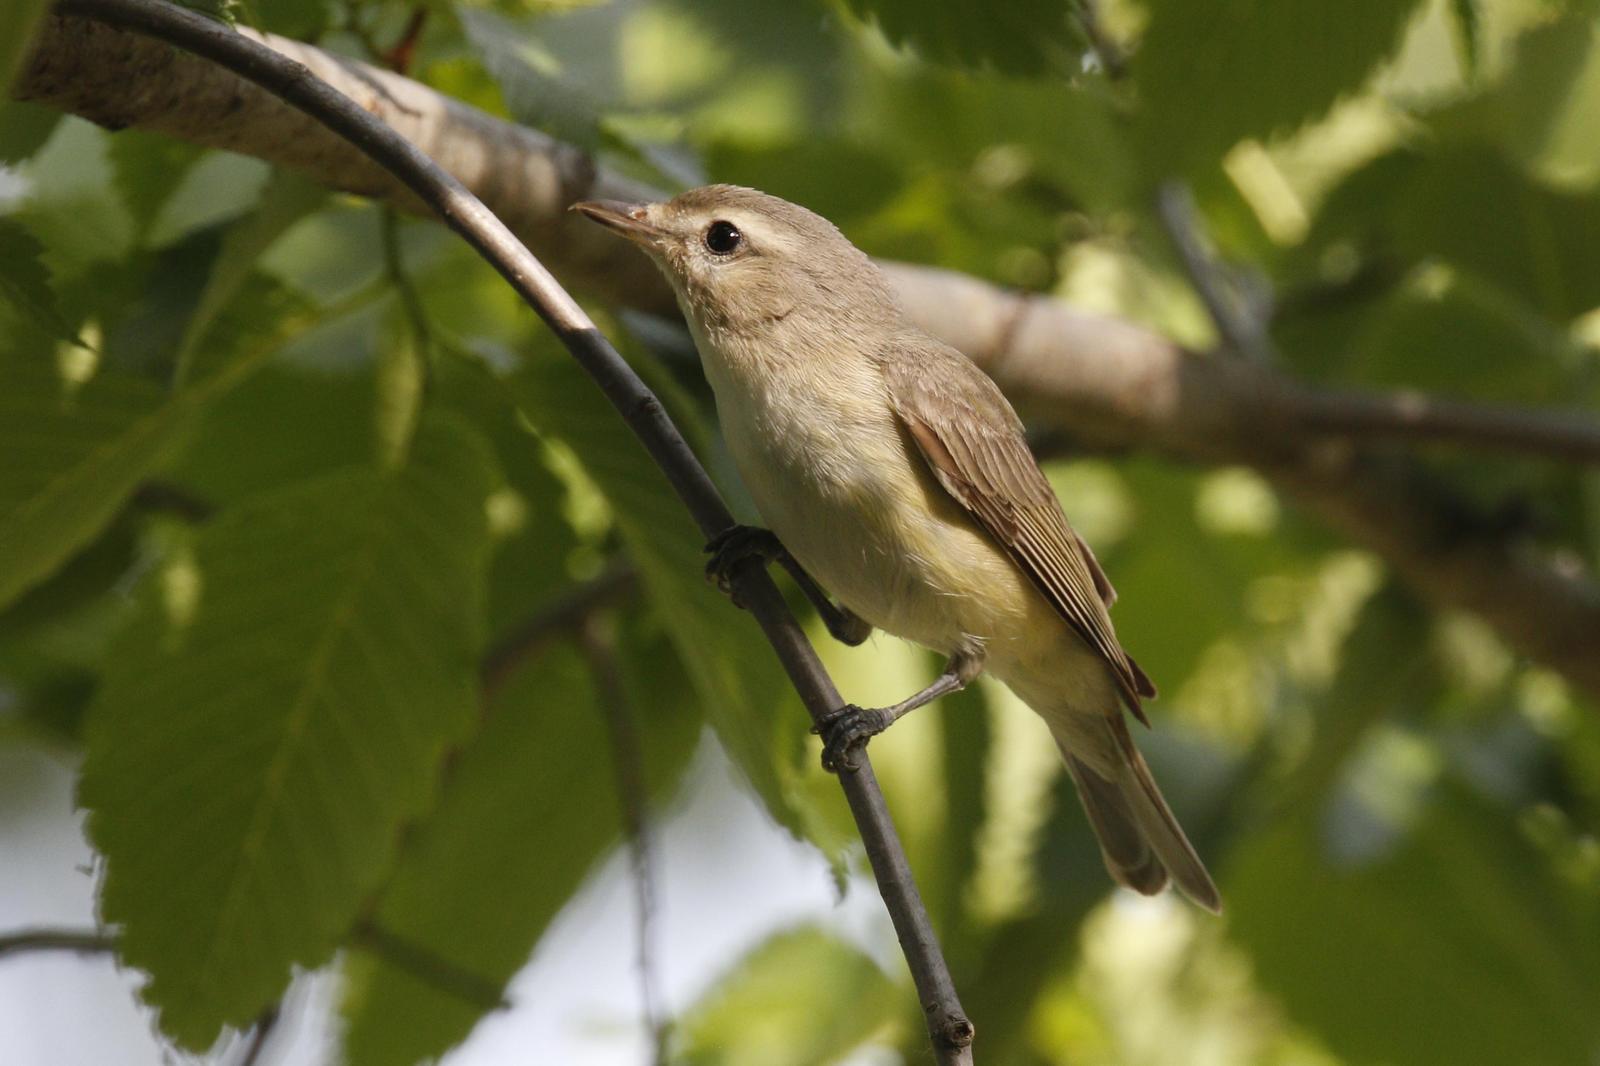 Warbling Vireo Photo by Emily Willoughby